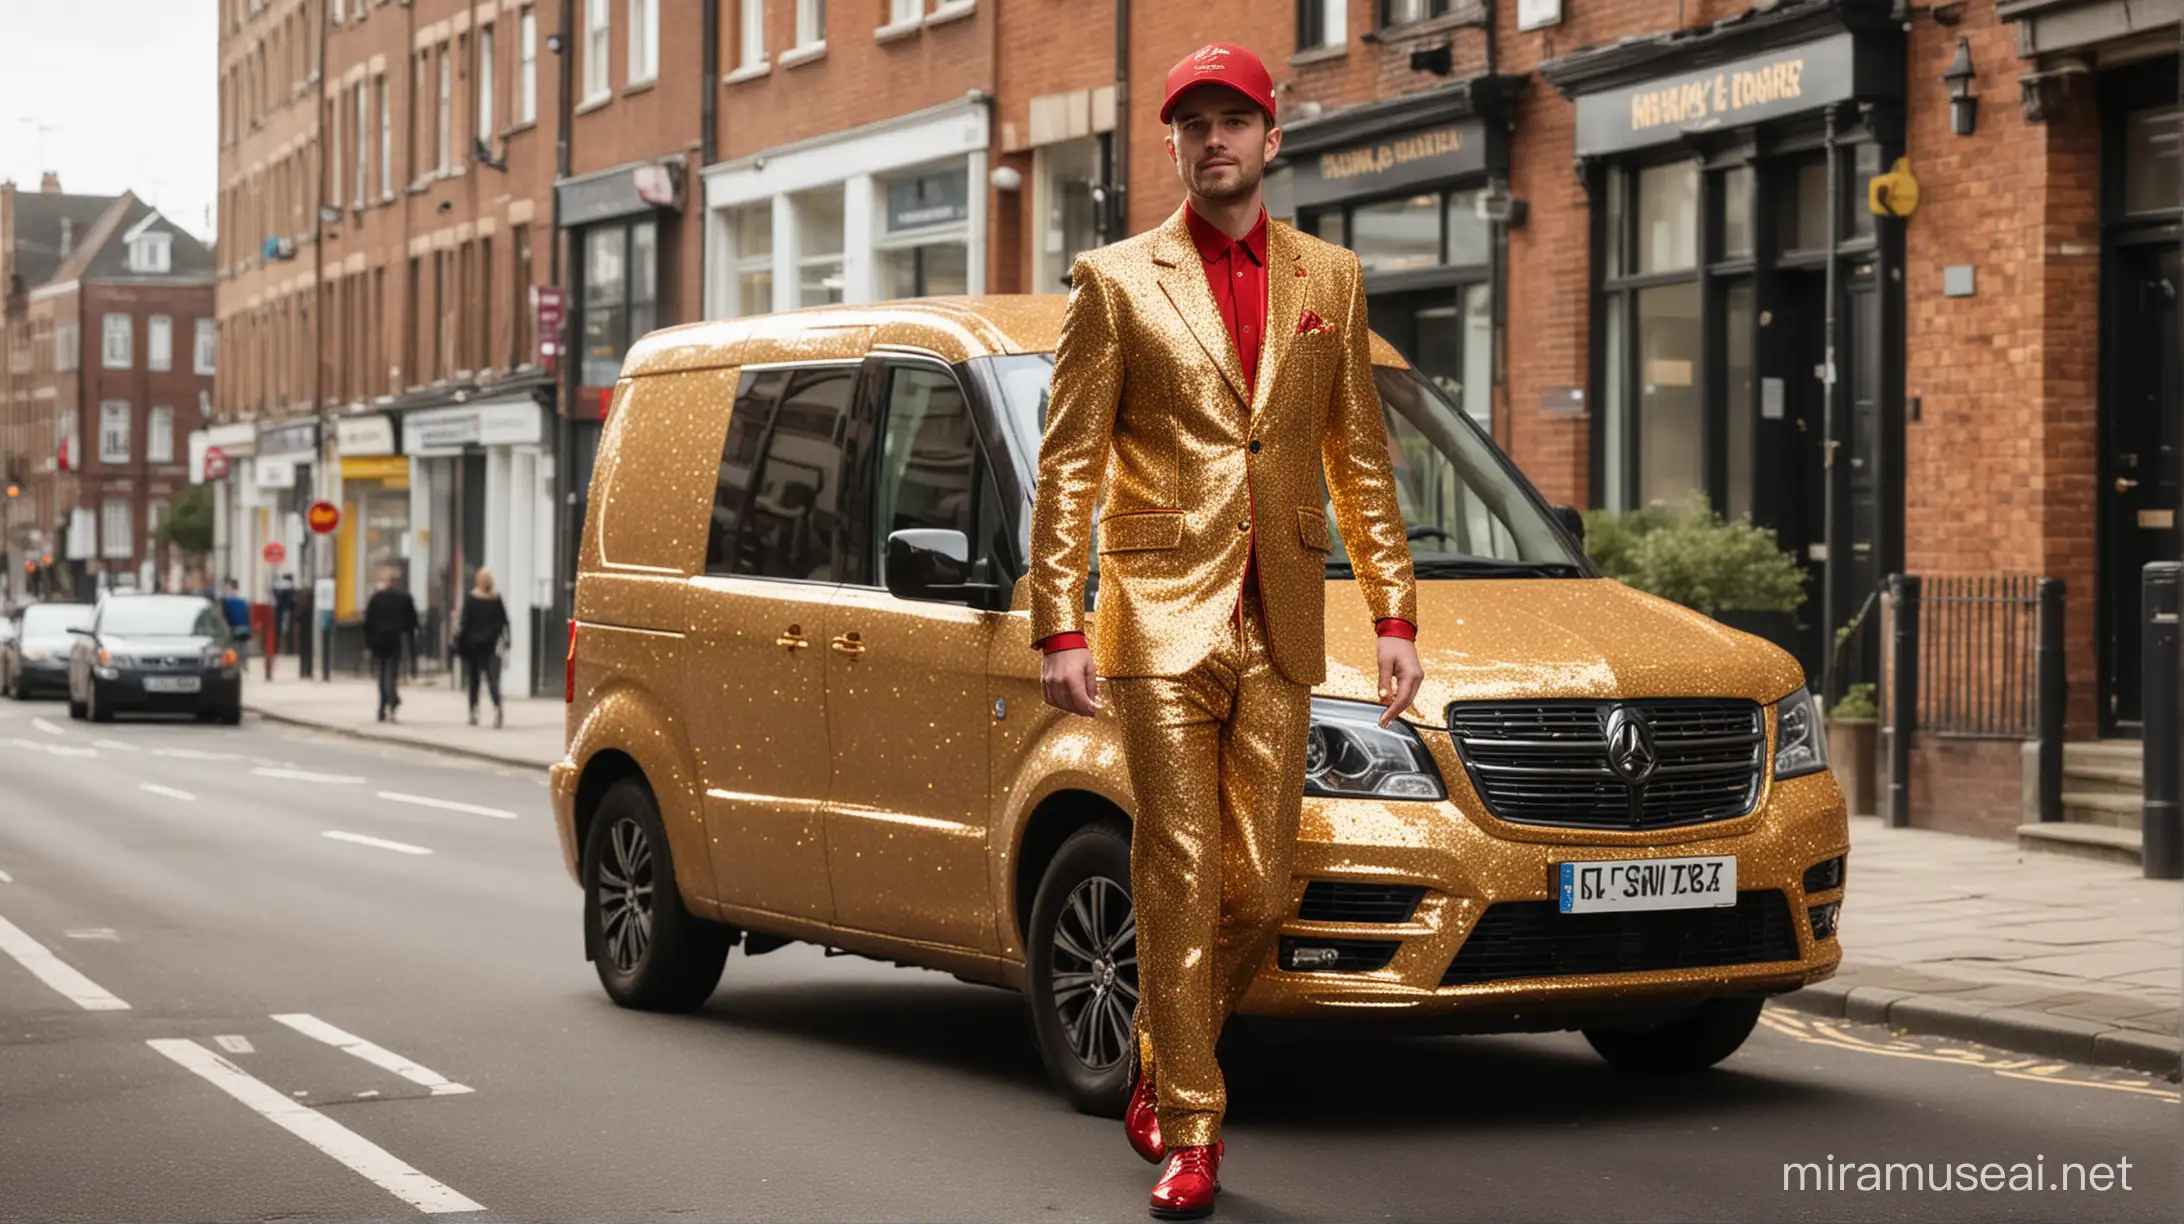 Flashy Food Delivery Driver in Gold and Red Sequin Suit Speeding Through Manchester